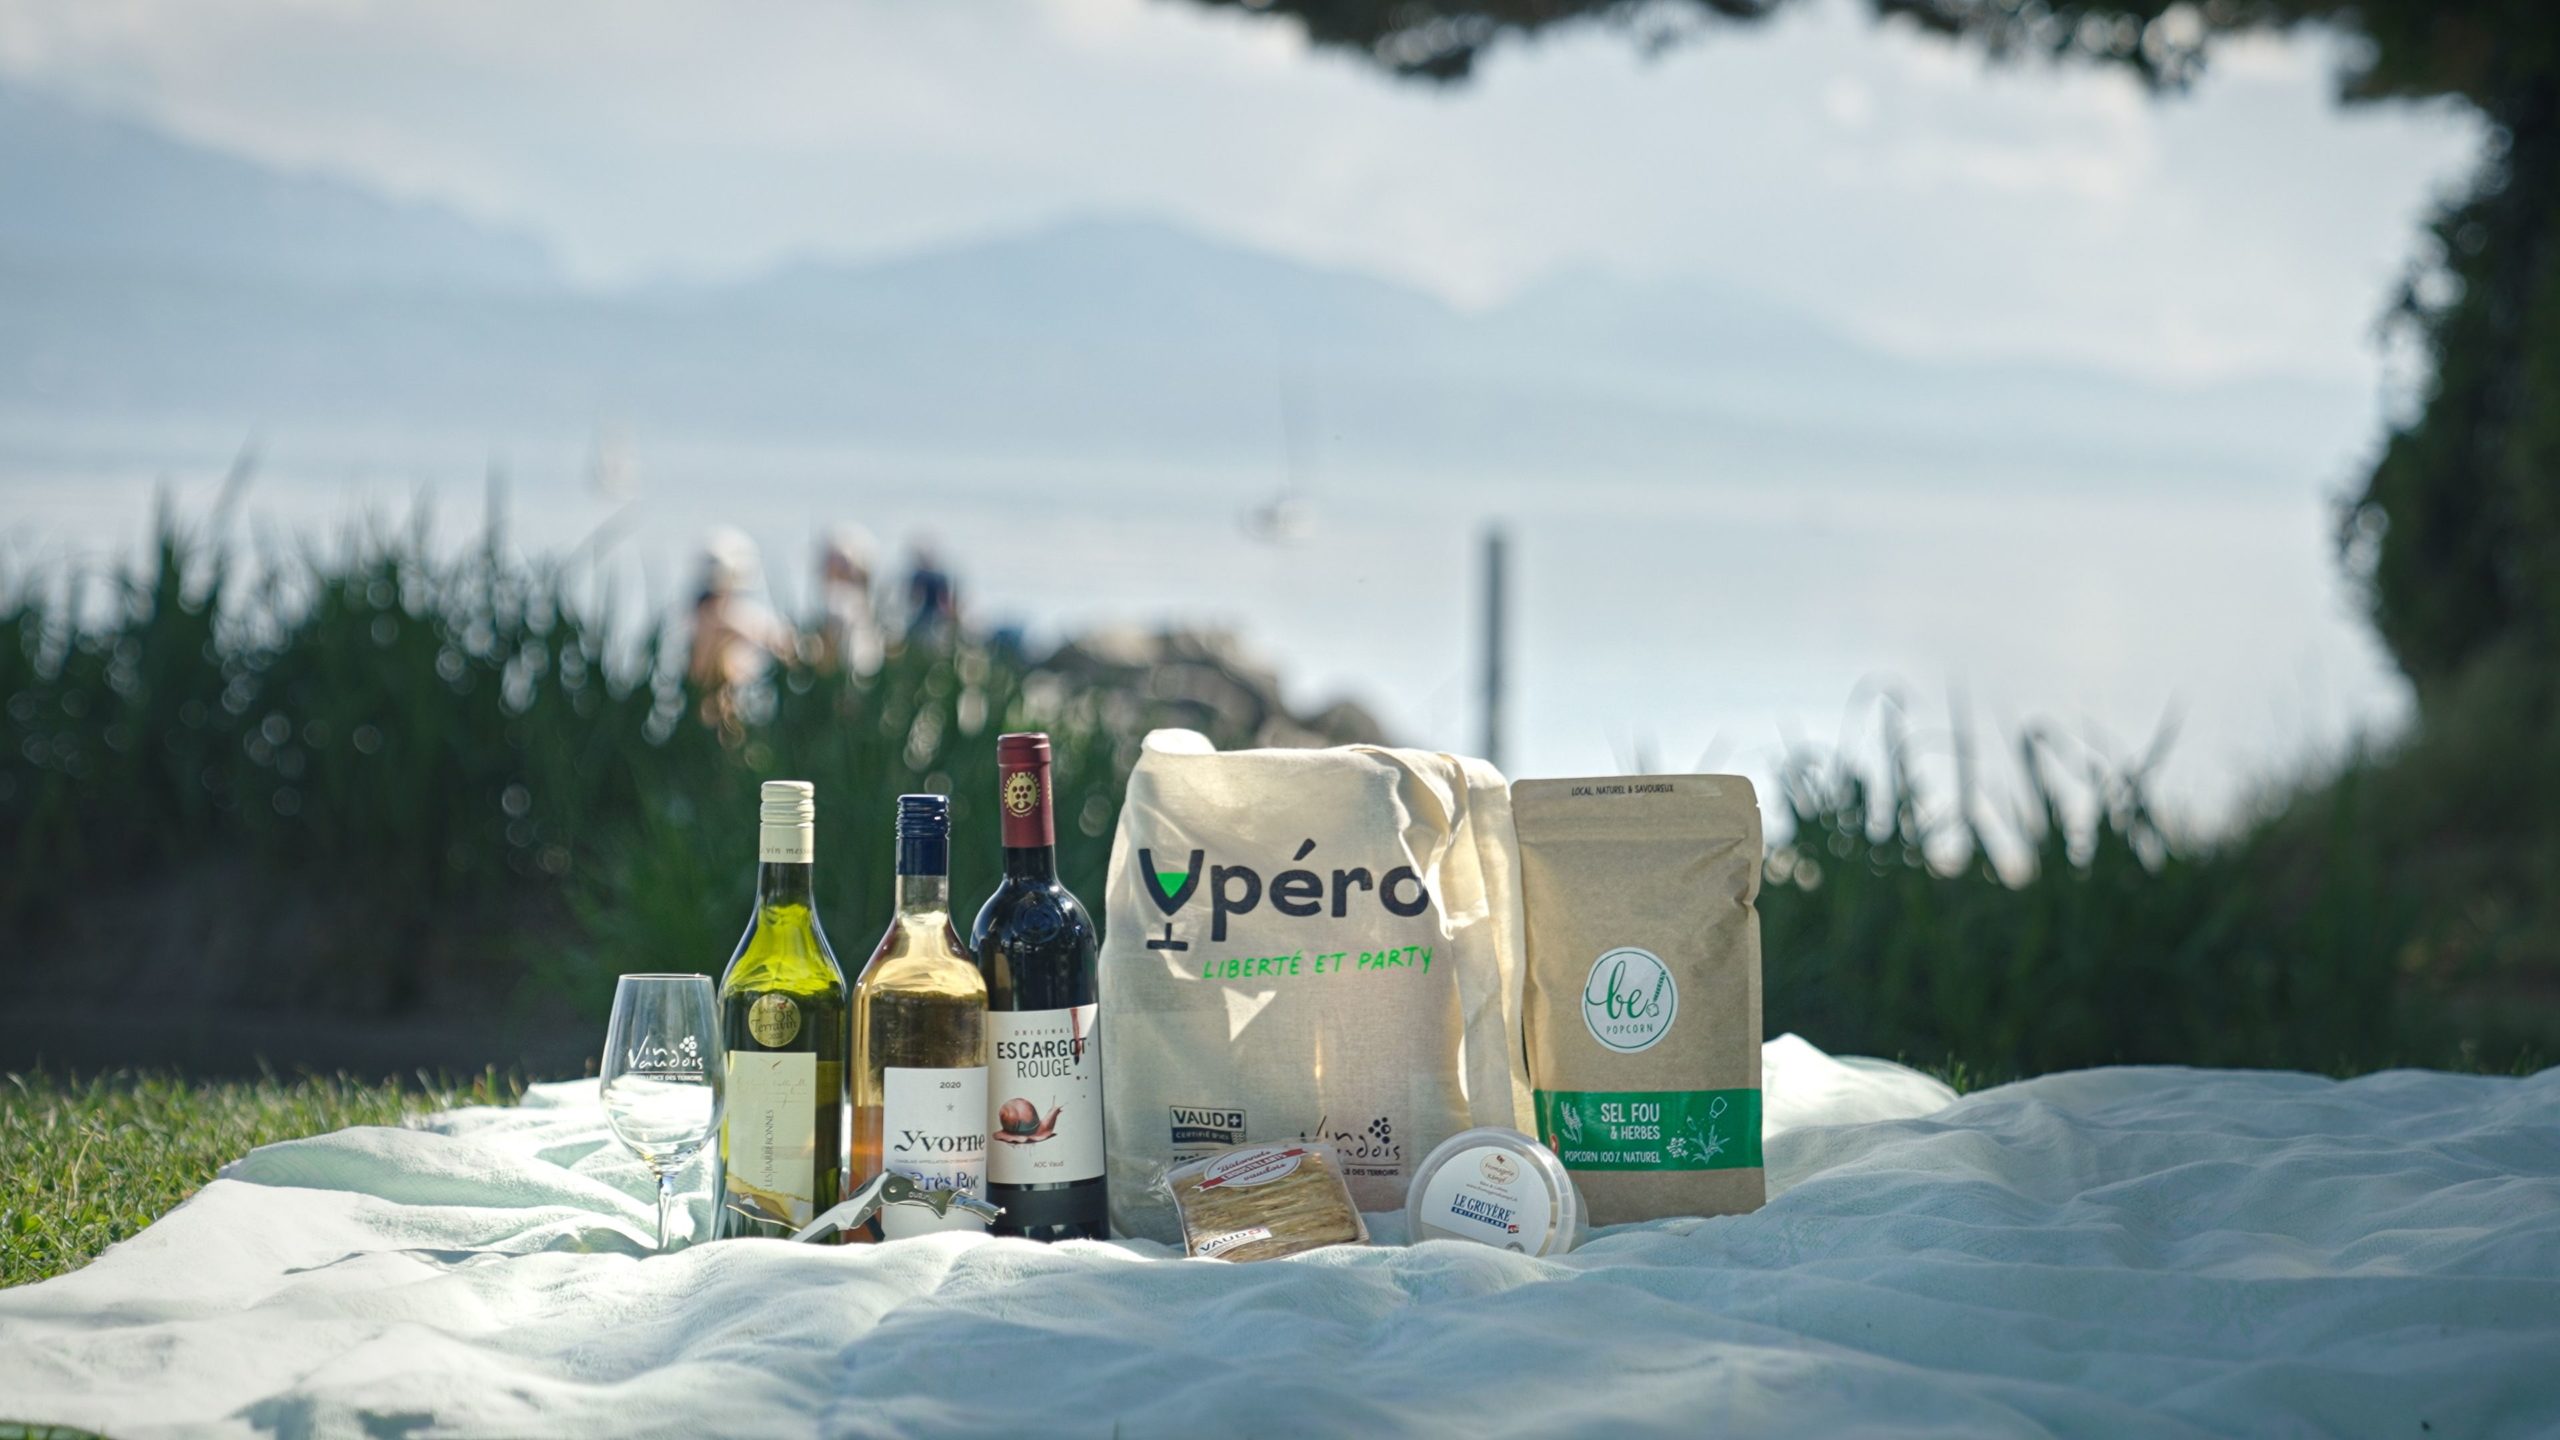 VPERO, to rescue your “aperos”!